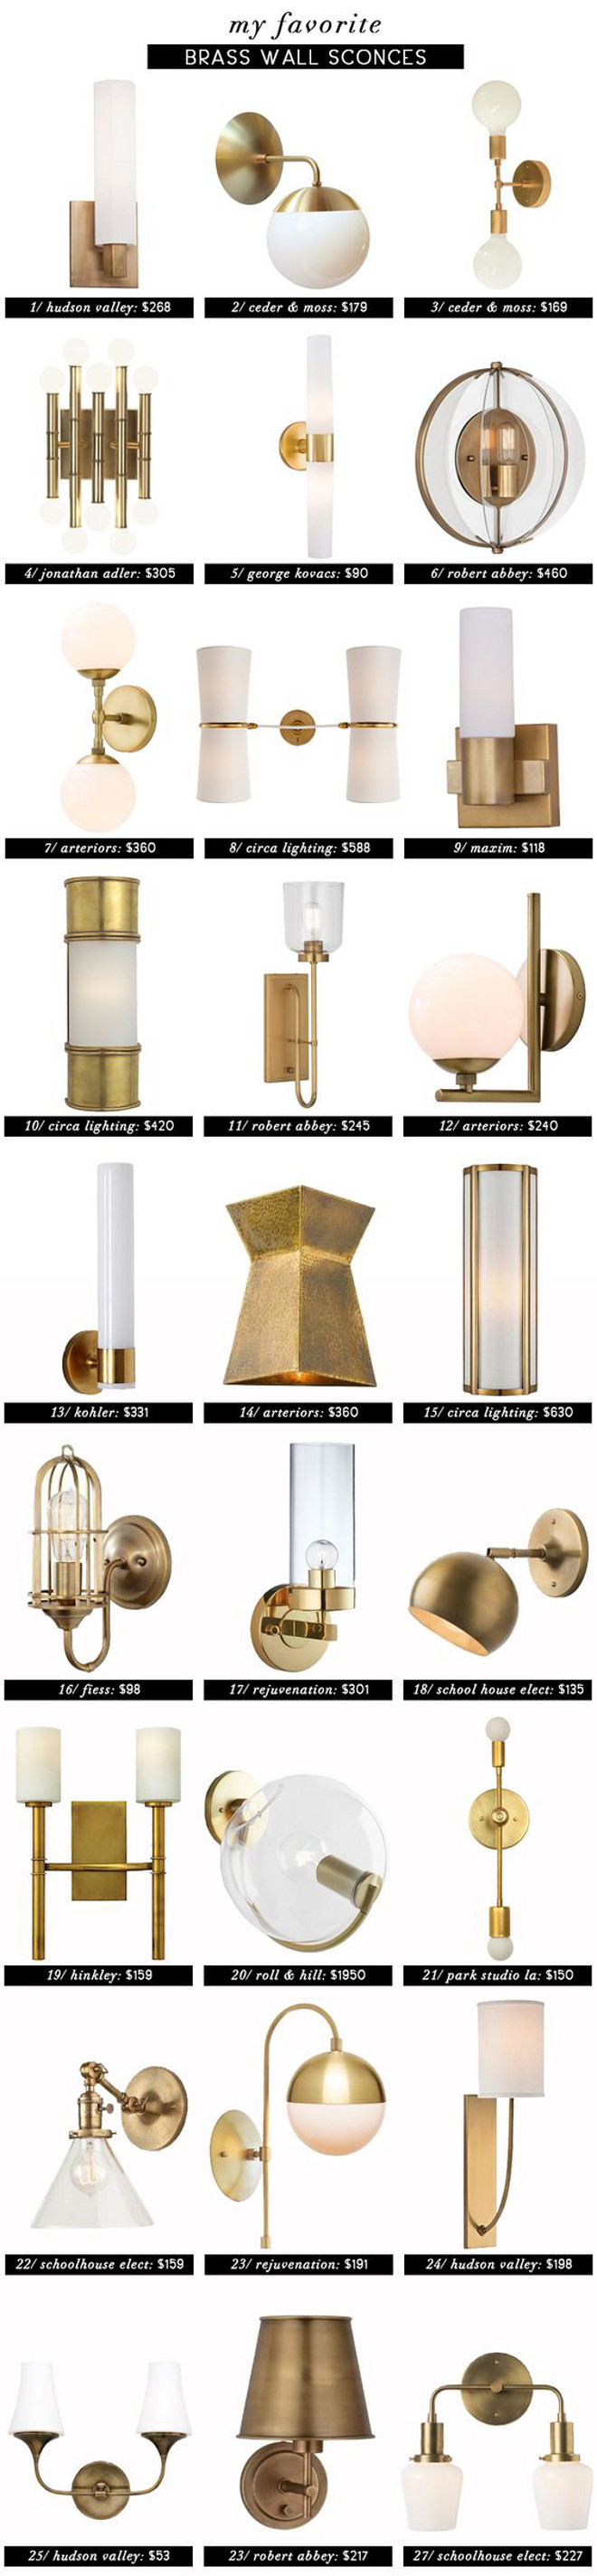 Brass Wall Sconces Roundup. Brass Wall Sconces. List of Brass Wall Sconces with price. # BrassWallSconces #BrassSconce #Brasssconces #ListBrassSconces #SconcePrice Via Emily Henderson.